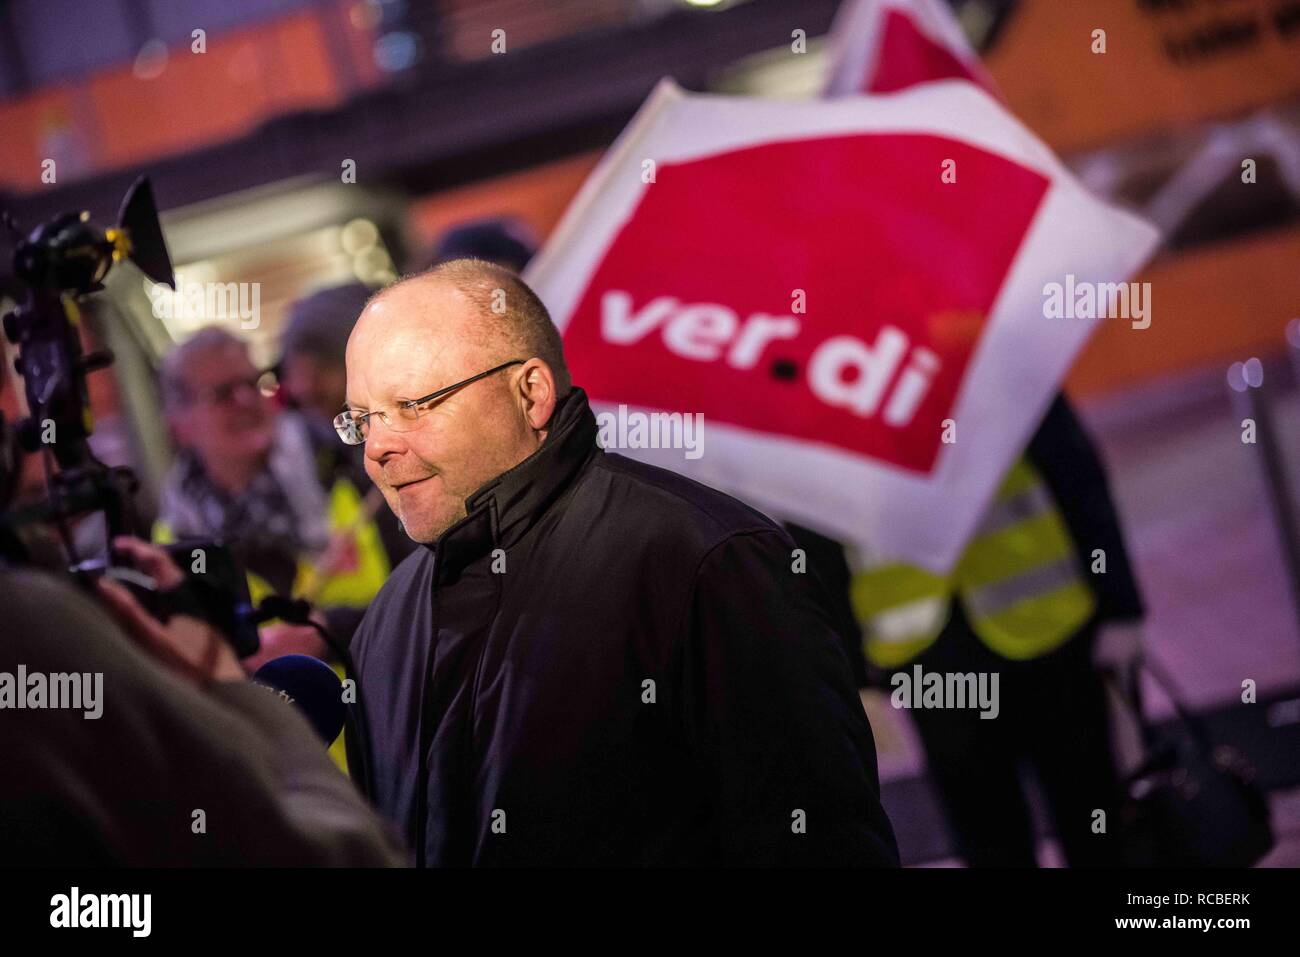 Munich, Bavaria, Germany. 15th Jan, 2019. Kai Winkler of the Verdi union at the Munich International Airport. Citing a breakdown in talks with employers on December 21st, the German Ver.di union organized the latest warning strike in a series at the Munich International Airport with members employed in Airport Security Services (Luftsicherheit) walking out from 3:30am to 24:00. The union is demanding 20 Euros per hour for their 1,000 total members working in Passenger-, Freight, Personnel, and Goods Control of Airport Security, along with recertification to bring other members to the same Stock Photo